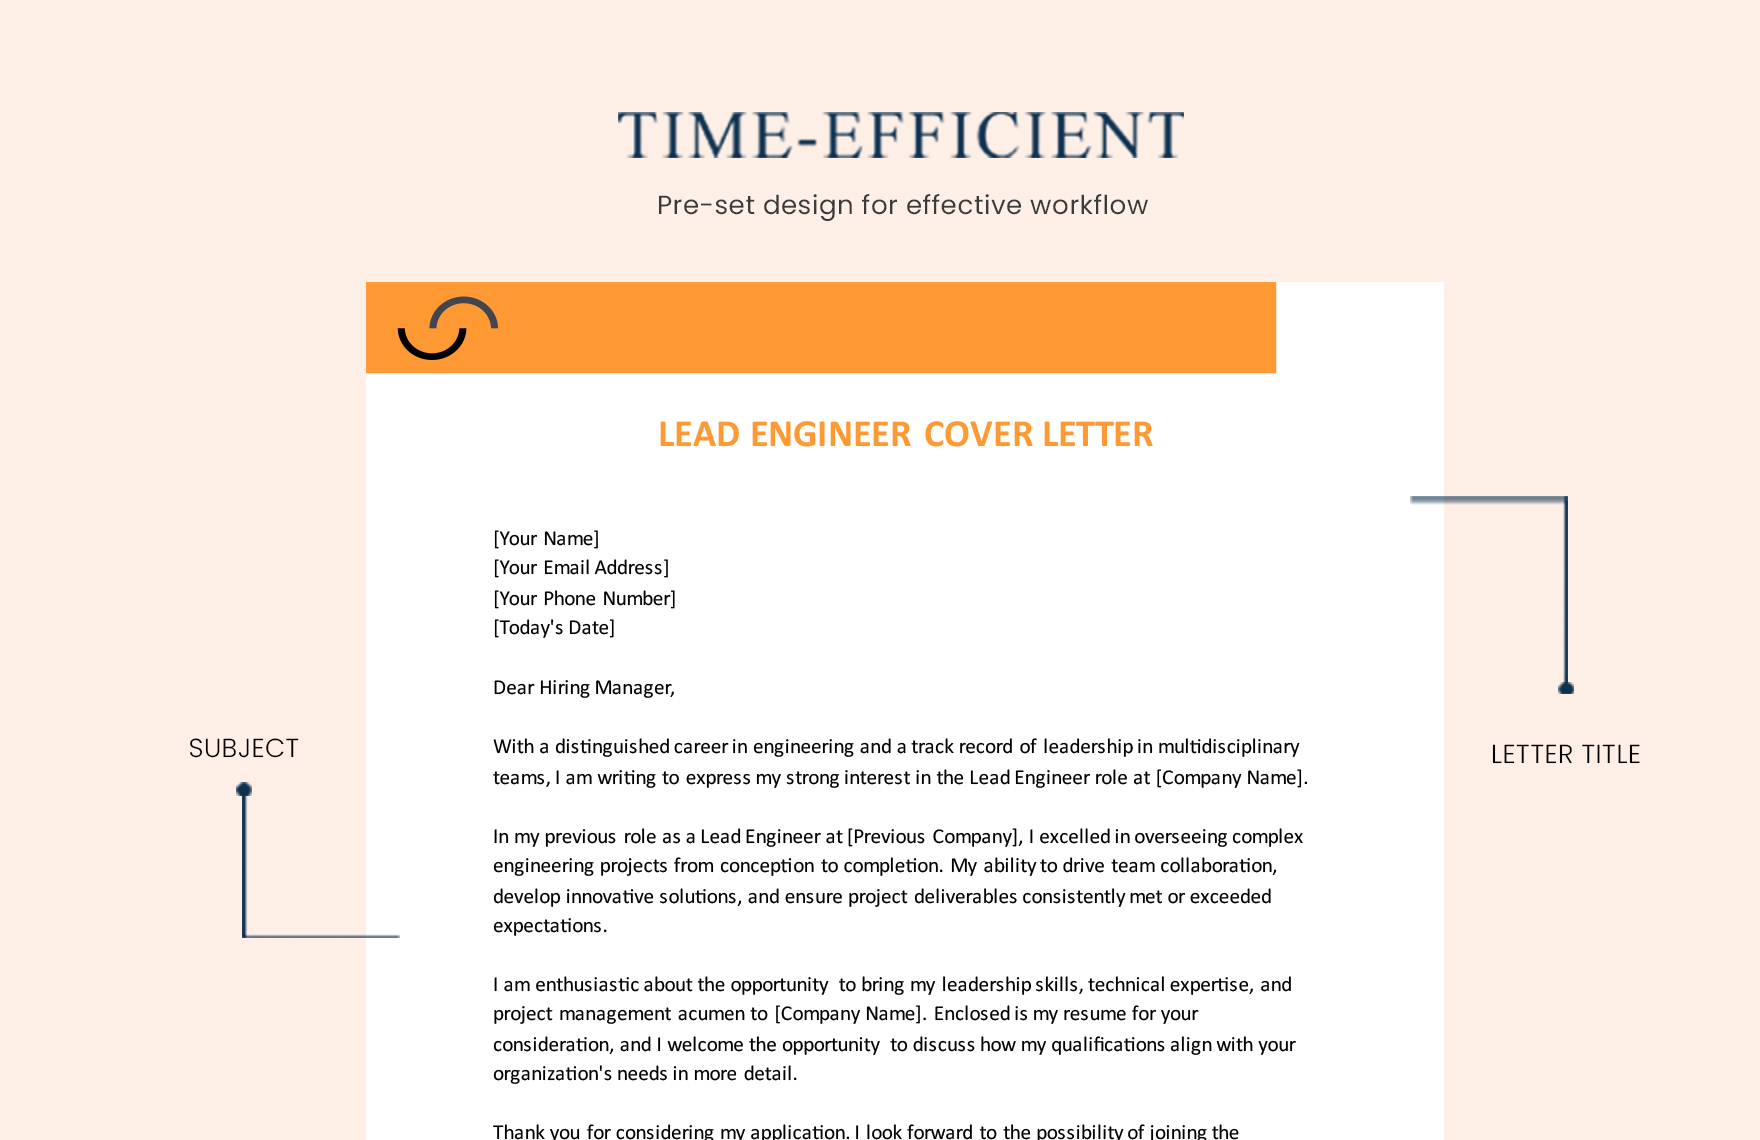 Lead Engineer Cover Letter